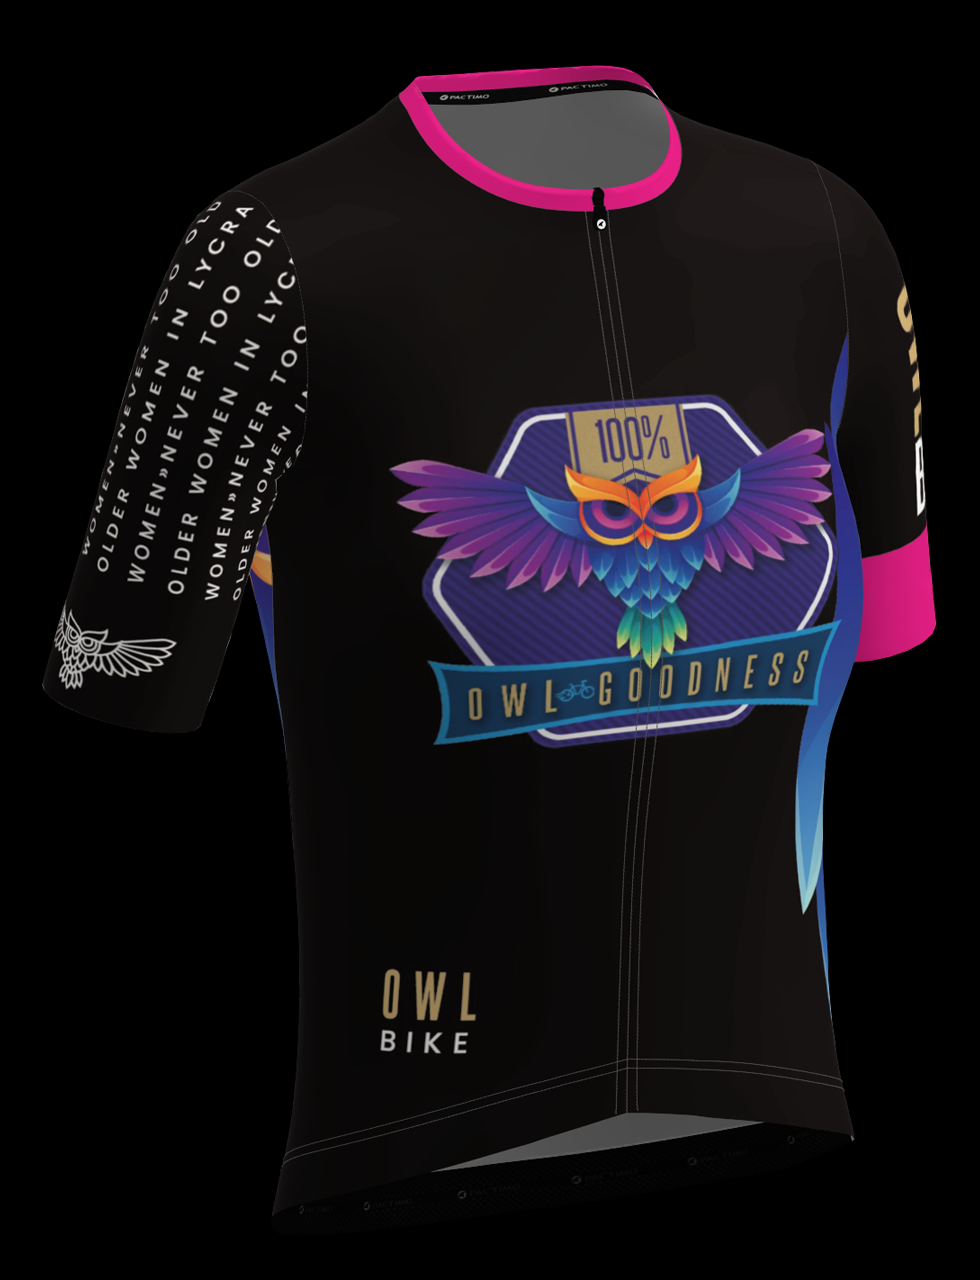 Product Team Owl Jersey Pro Ps 920x1280